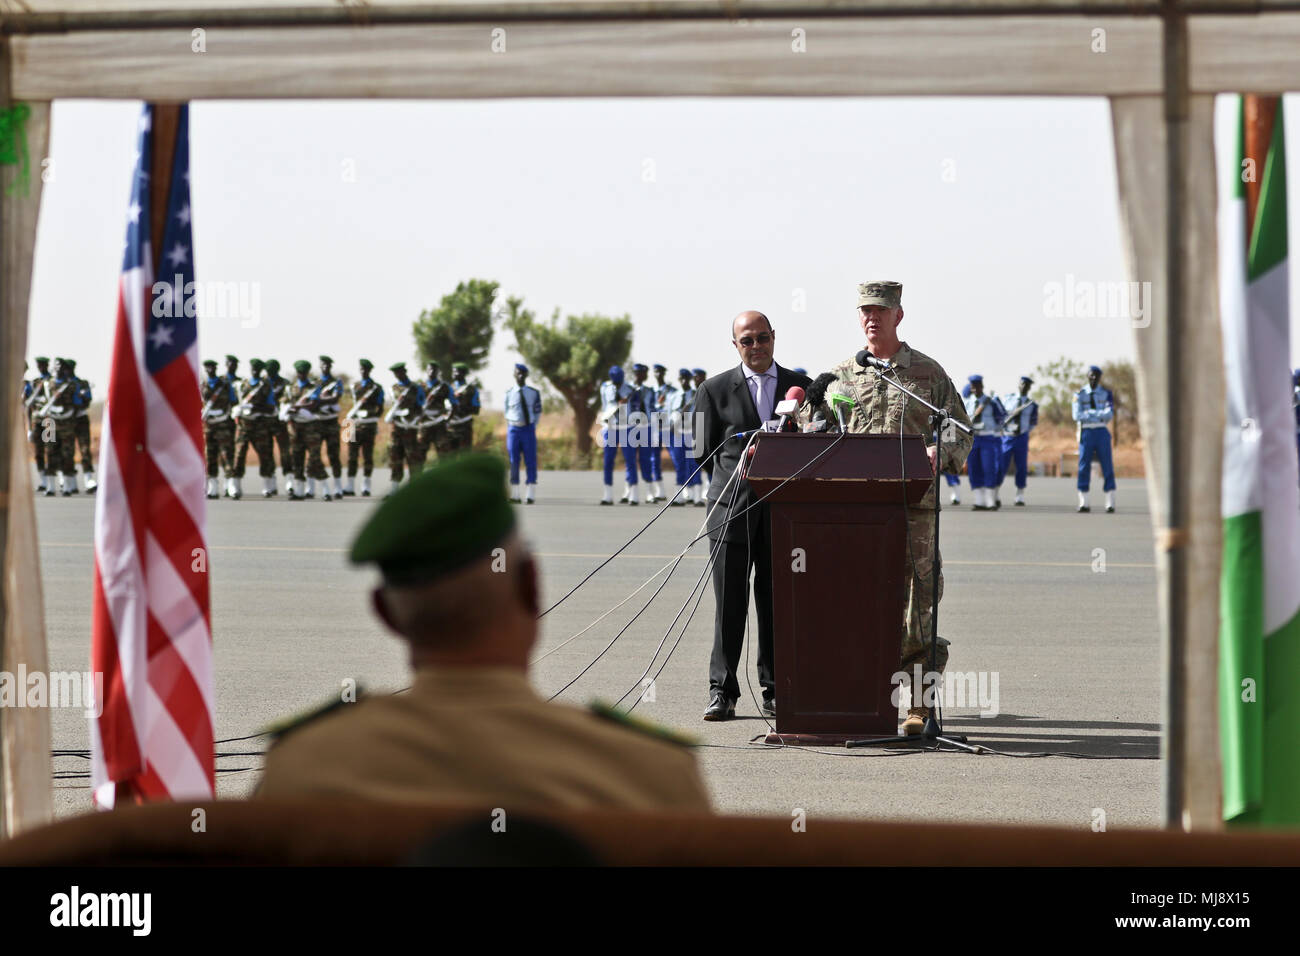 U.S. Air Force Maj. Gen. Marcus Hicks, commander, Special Operations Command Africa, gives remarks during the closing ceremony of Flintlock 2018 in Niamey, Niger, April 20, 2018. Flintlock, hosted by Niger, with key outstations at Burkina Faso and Senegal, is designed to strengthen the ability of key partner nations in the region to counter violent extremist organizations, protect their borders, and provide security for their people. (U.S. Army Photo by Sgt. Heather Doppke/79th Theater Sustainment Command) Stock Photo